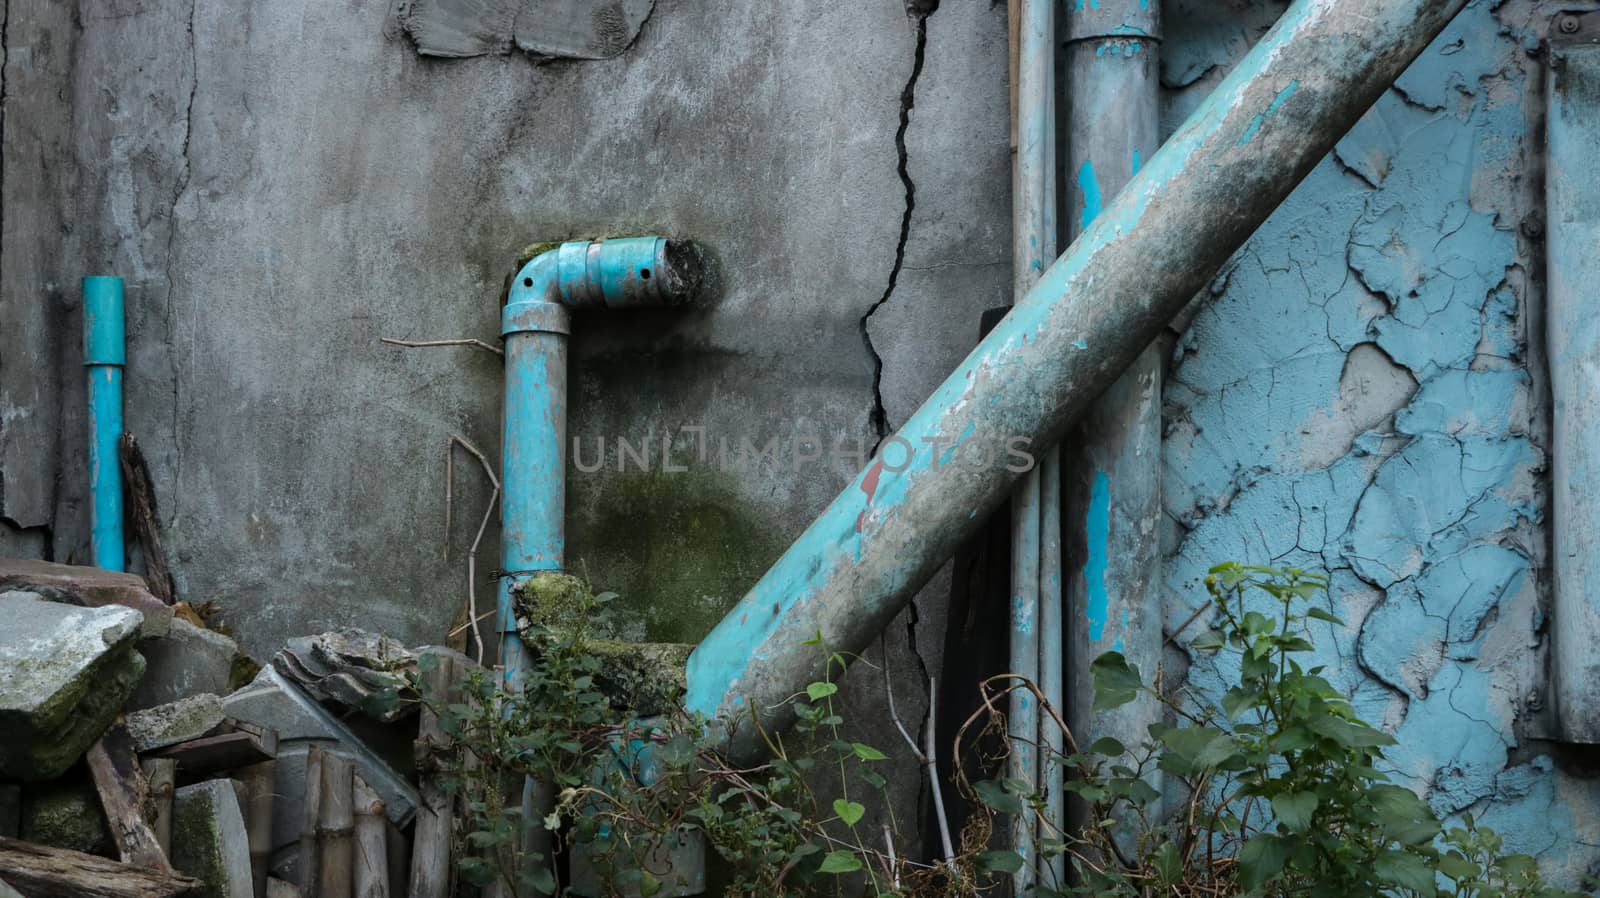 Blue/ Teal Painted Water Pipes on Moldy Old Wall with Green Herbs in Abandoned Garden/ Junkyard. Rural Thailand.